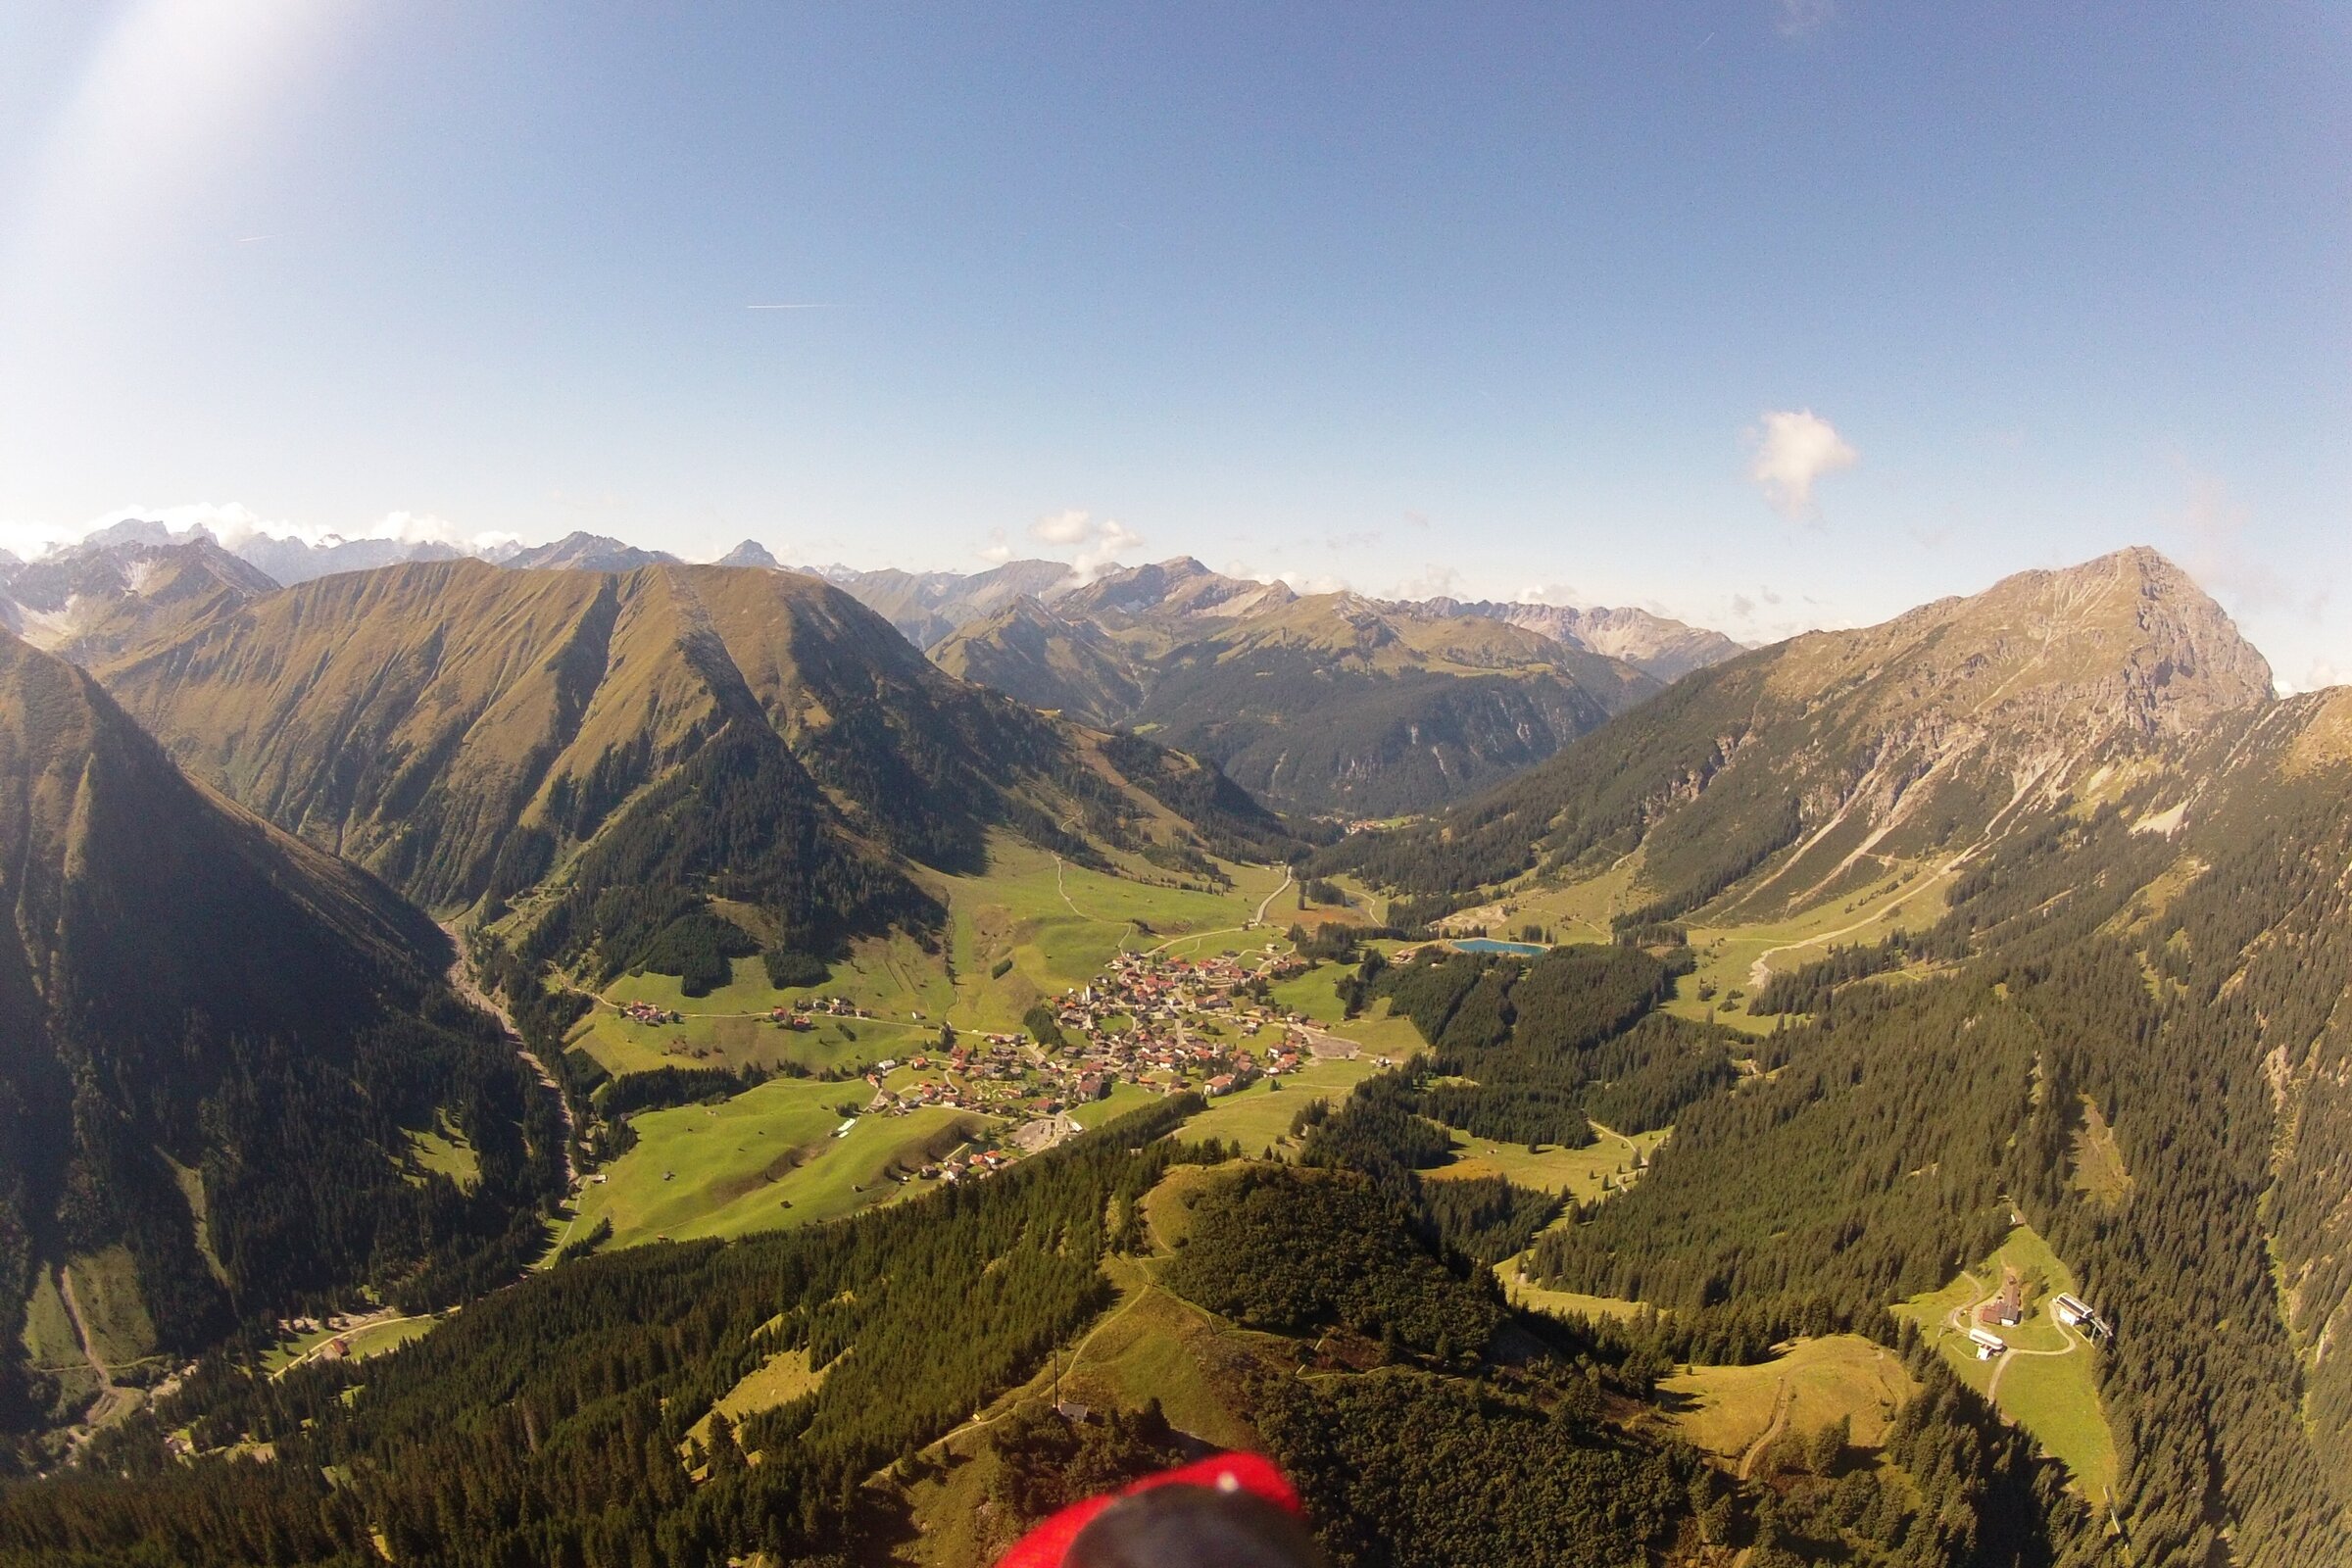 Berwang from the paraglider's perspective